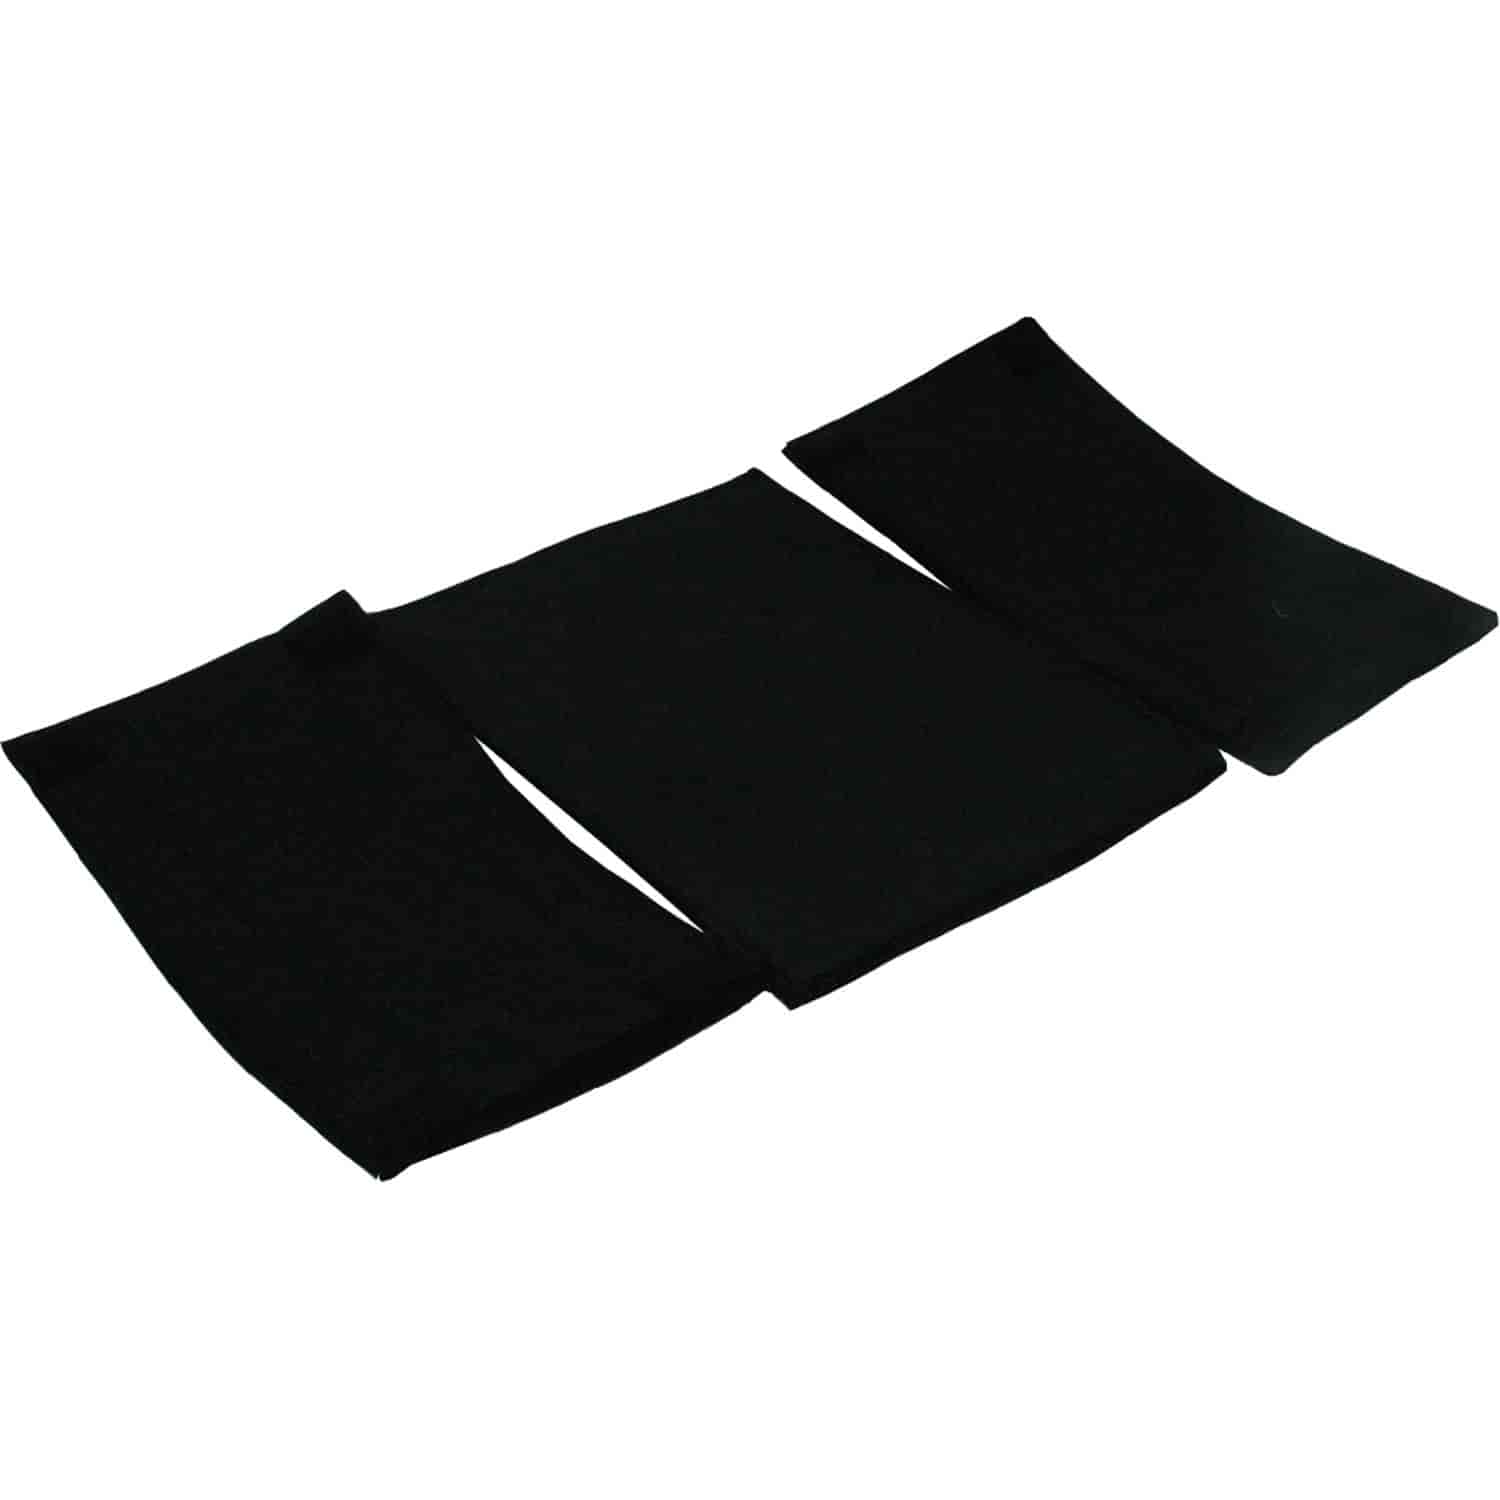 Replacement Oil Pads for 821-7809A Pad One Dimensions: